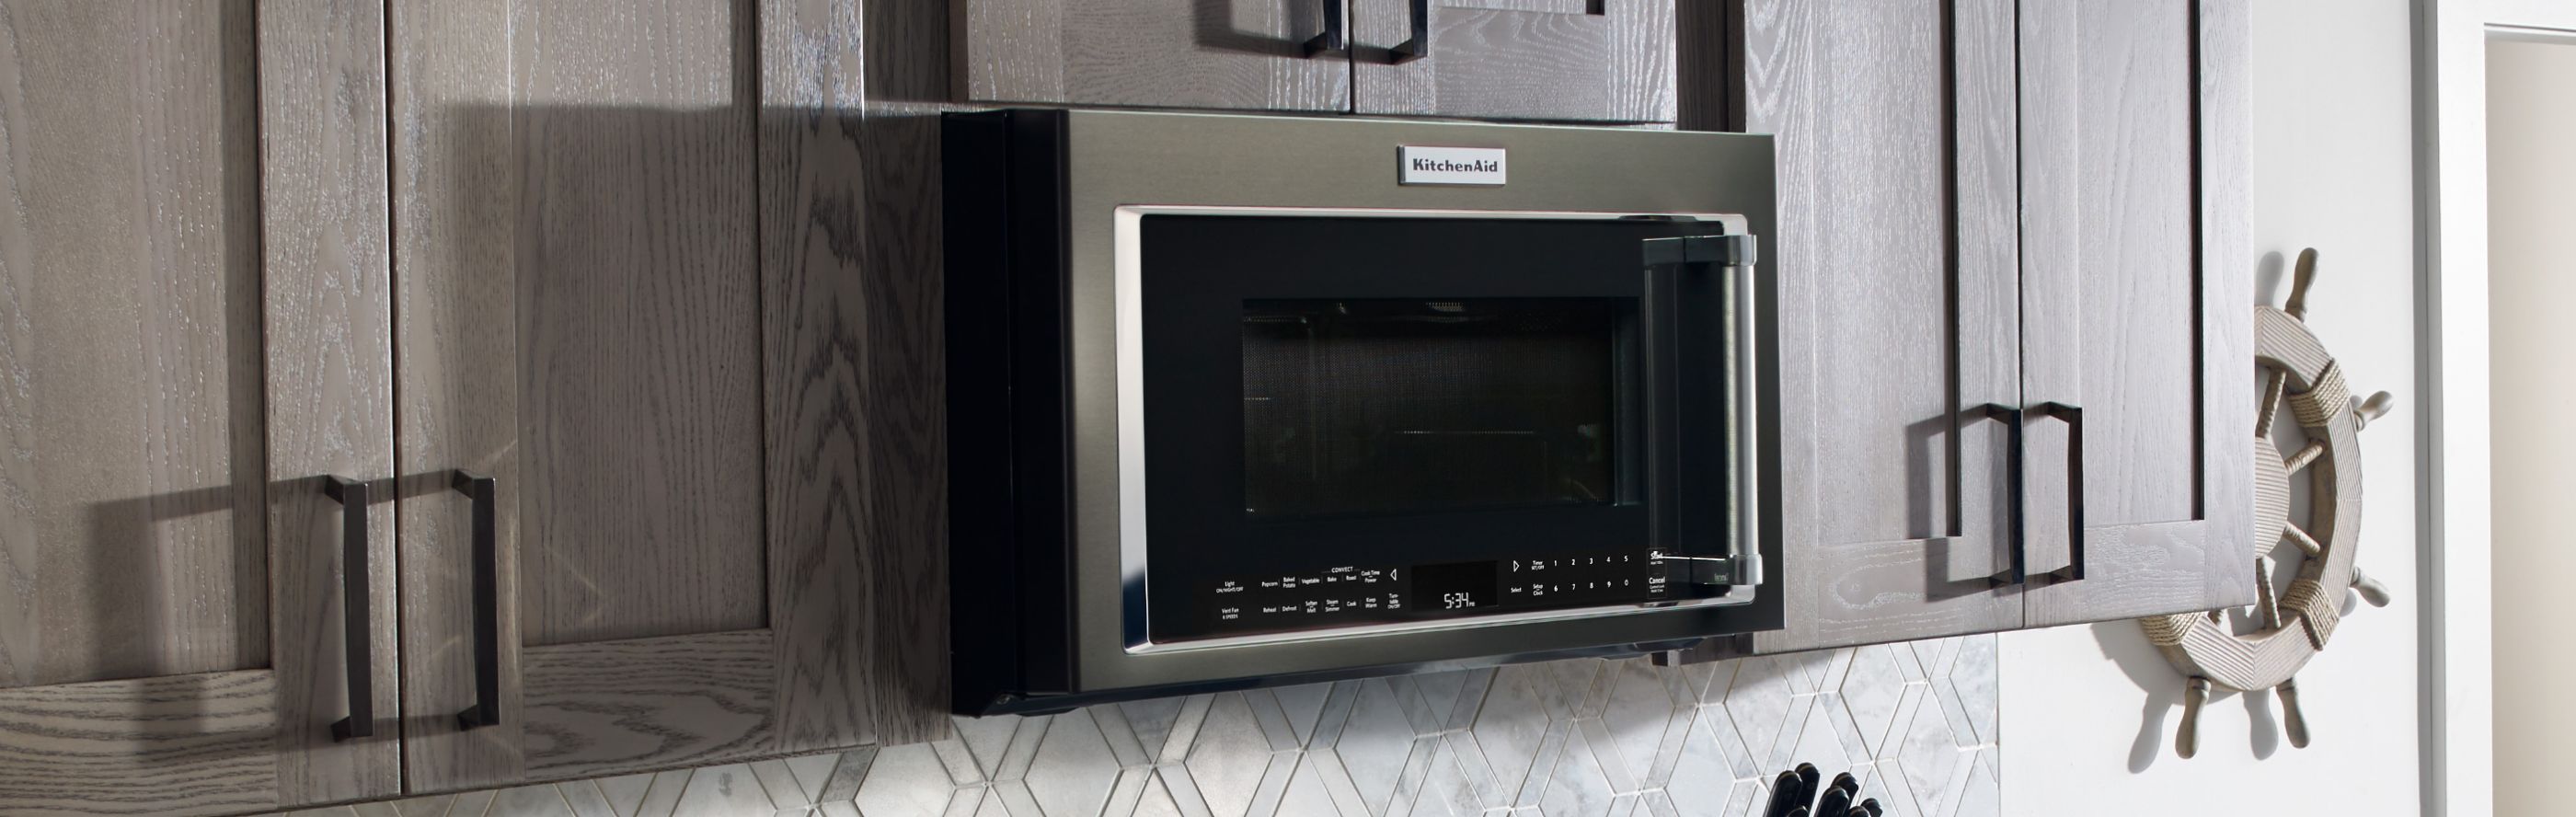 KitchenAid® microwave set in cabinetry